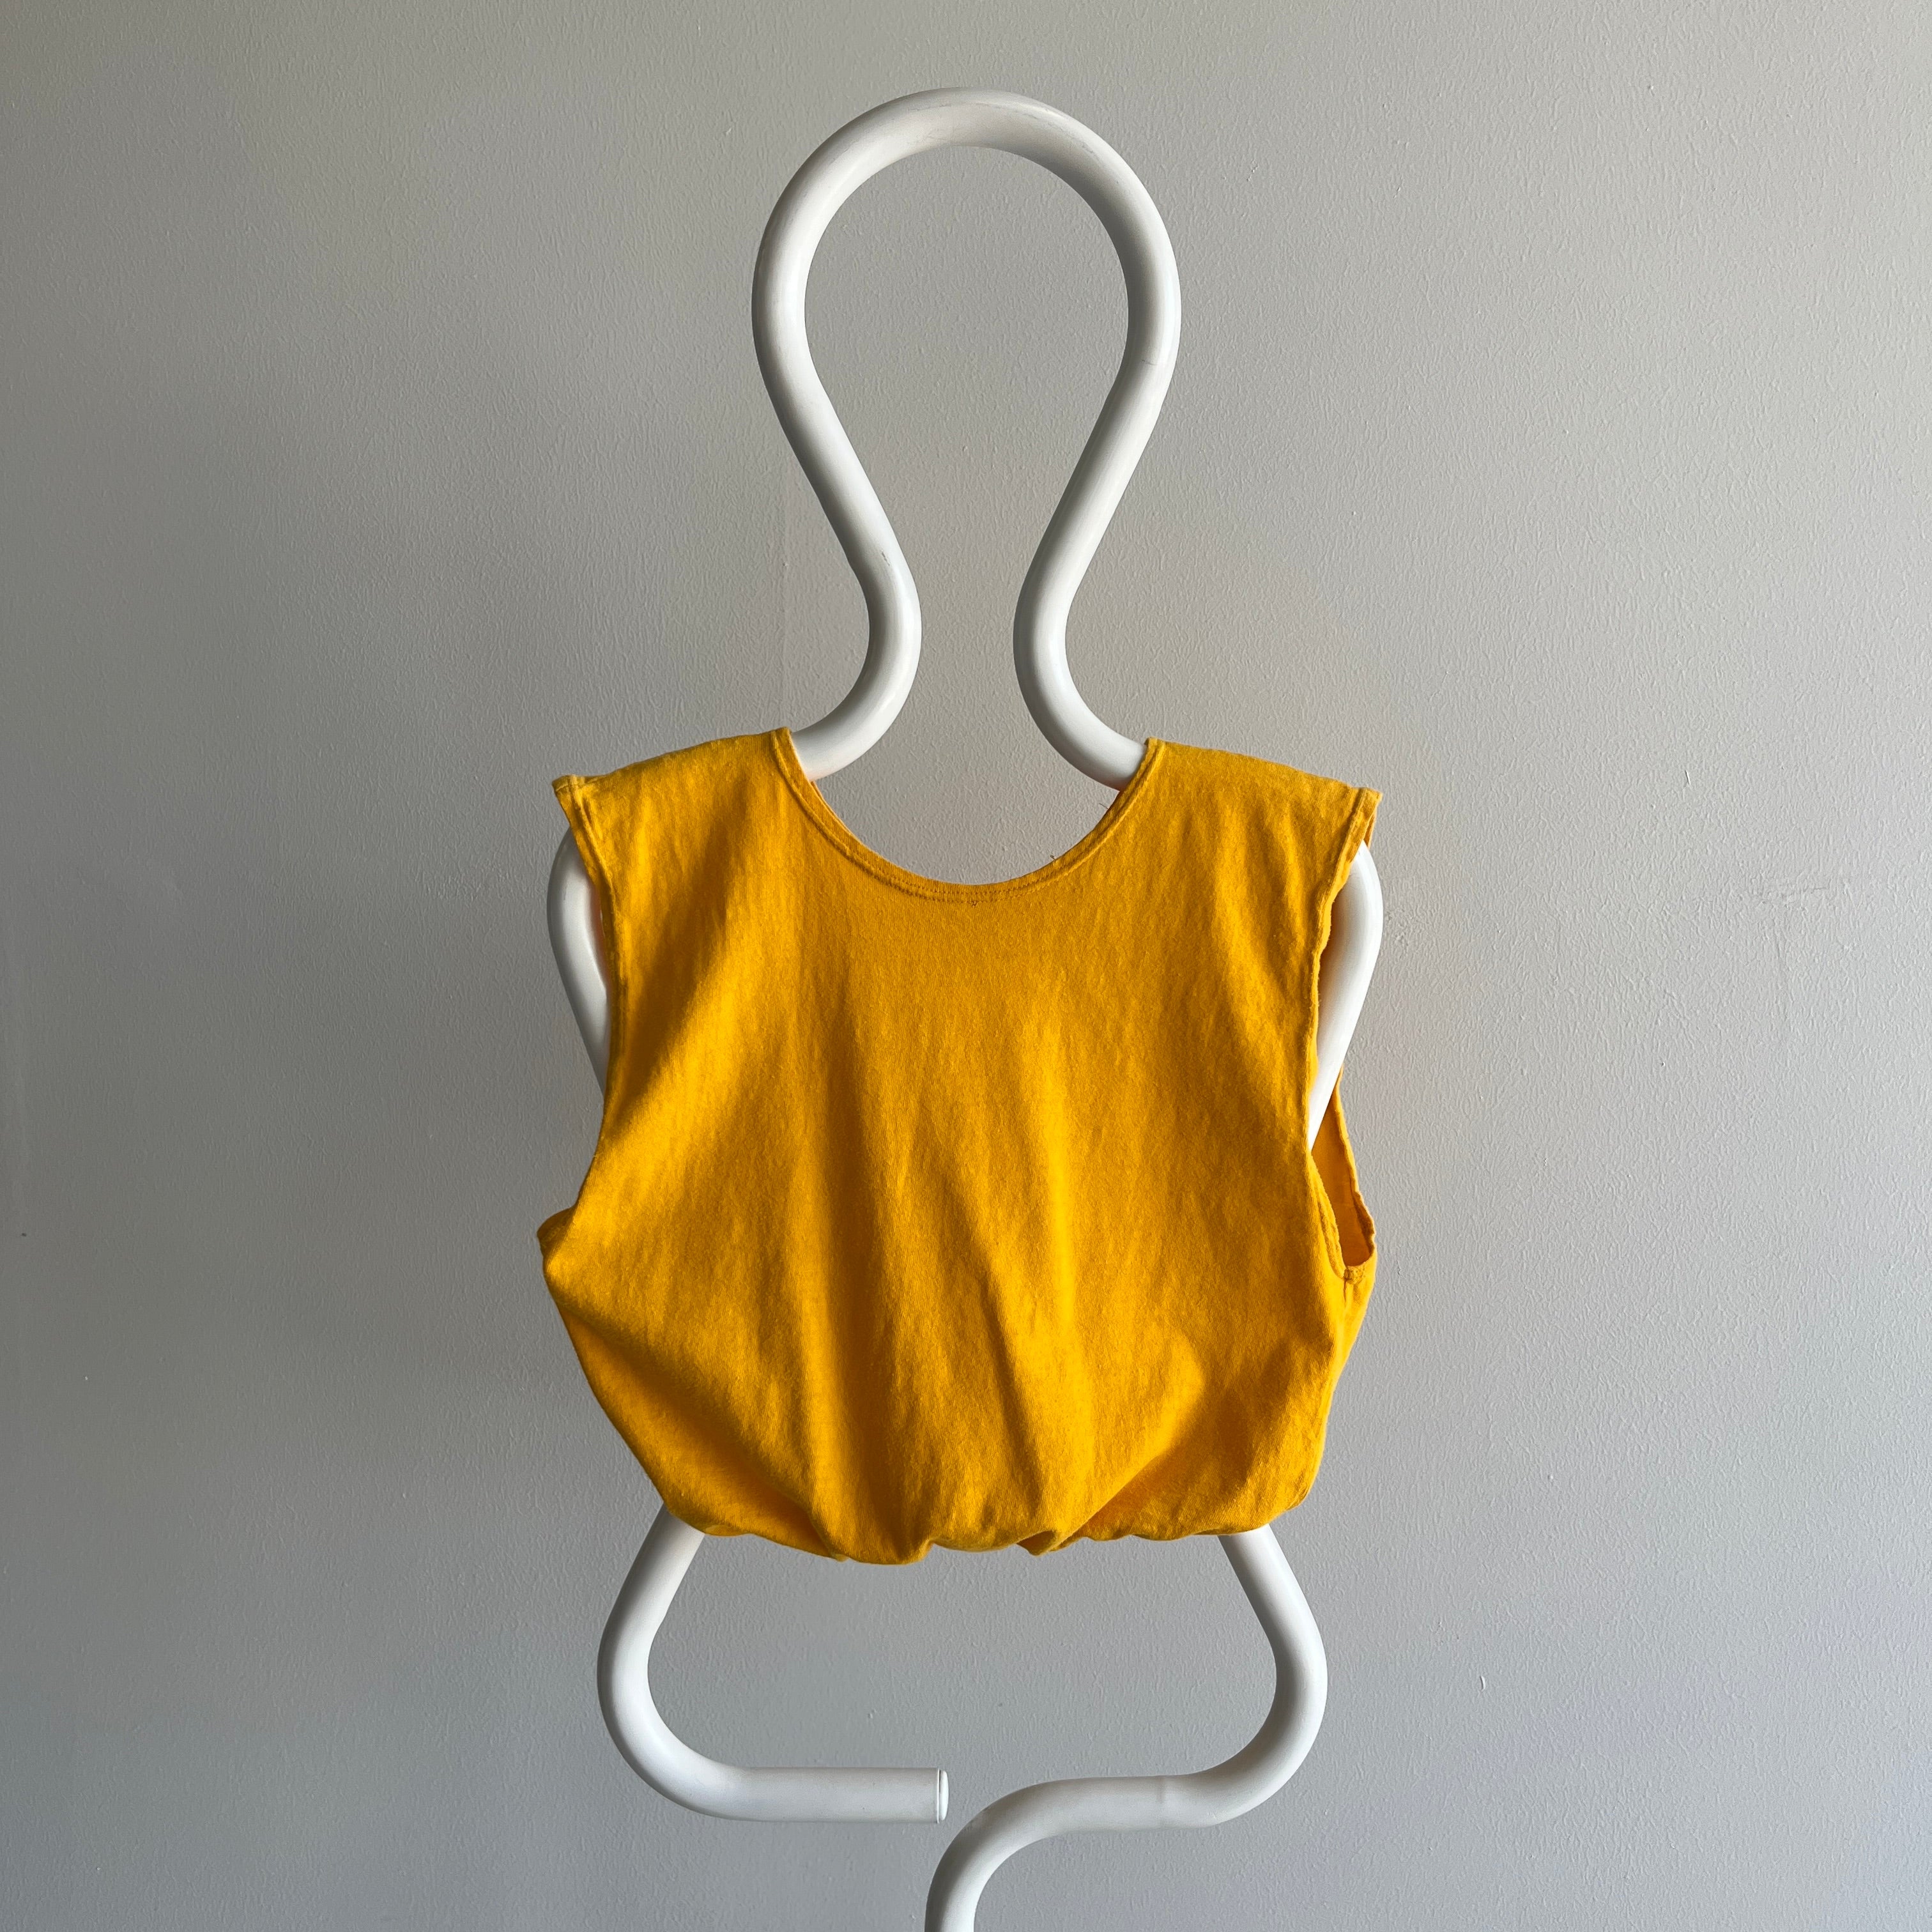 1960/70s Russell Brand Marigold Cotton Tank - V Cool Fit!